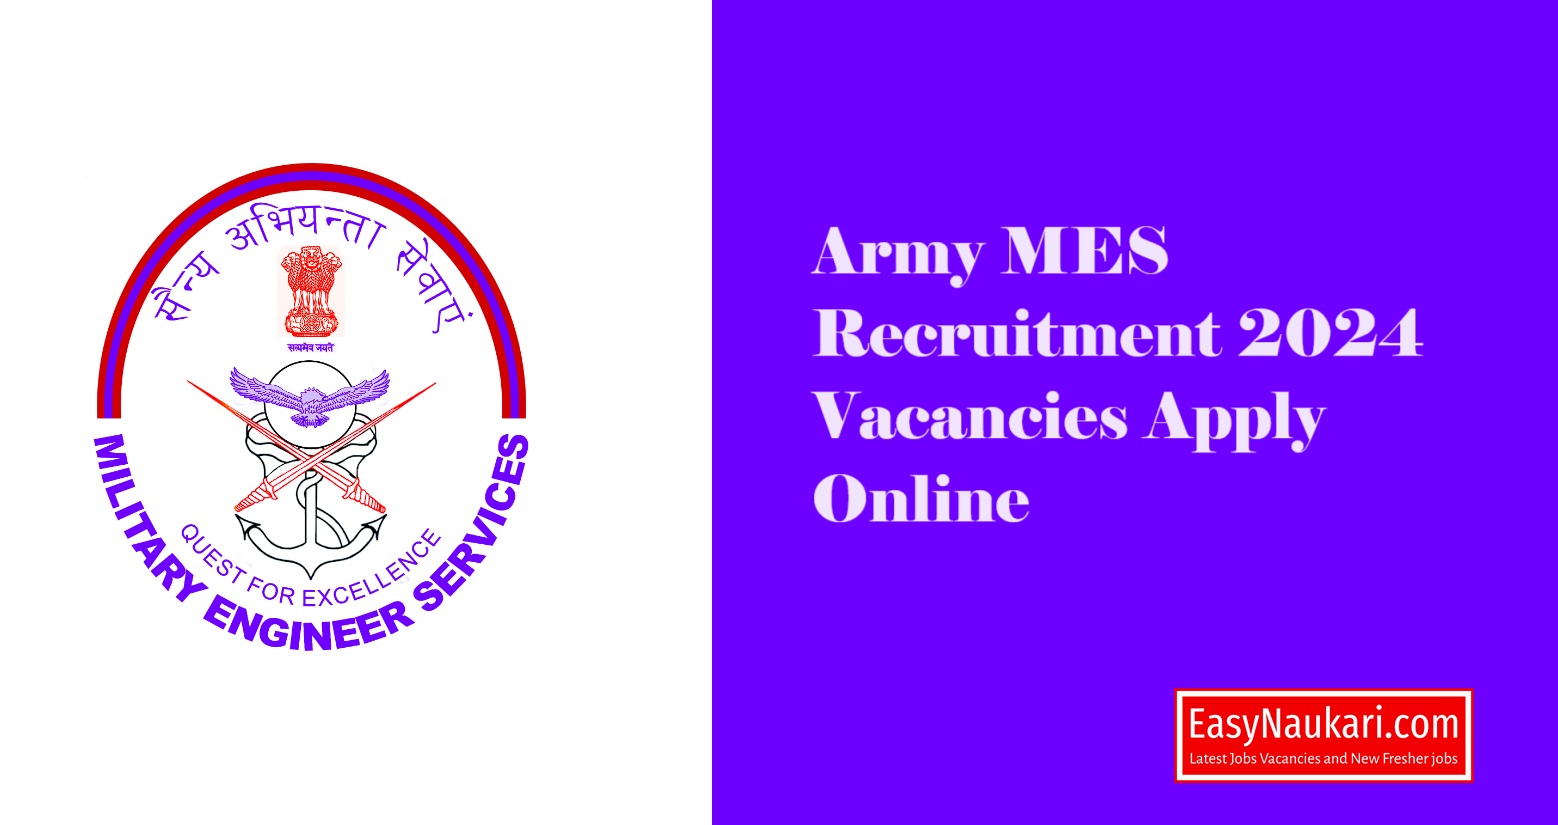 Army MES Recruitment 2024 Vacancies Apply Online